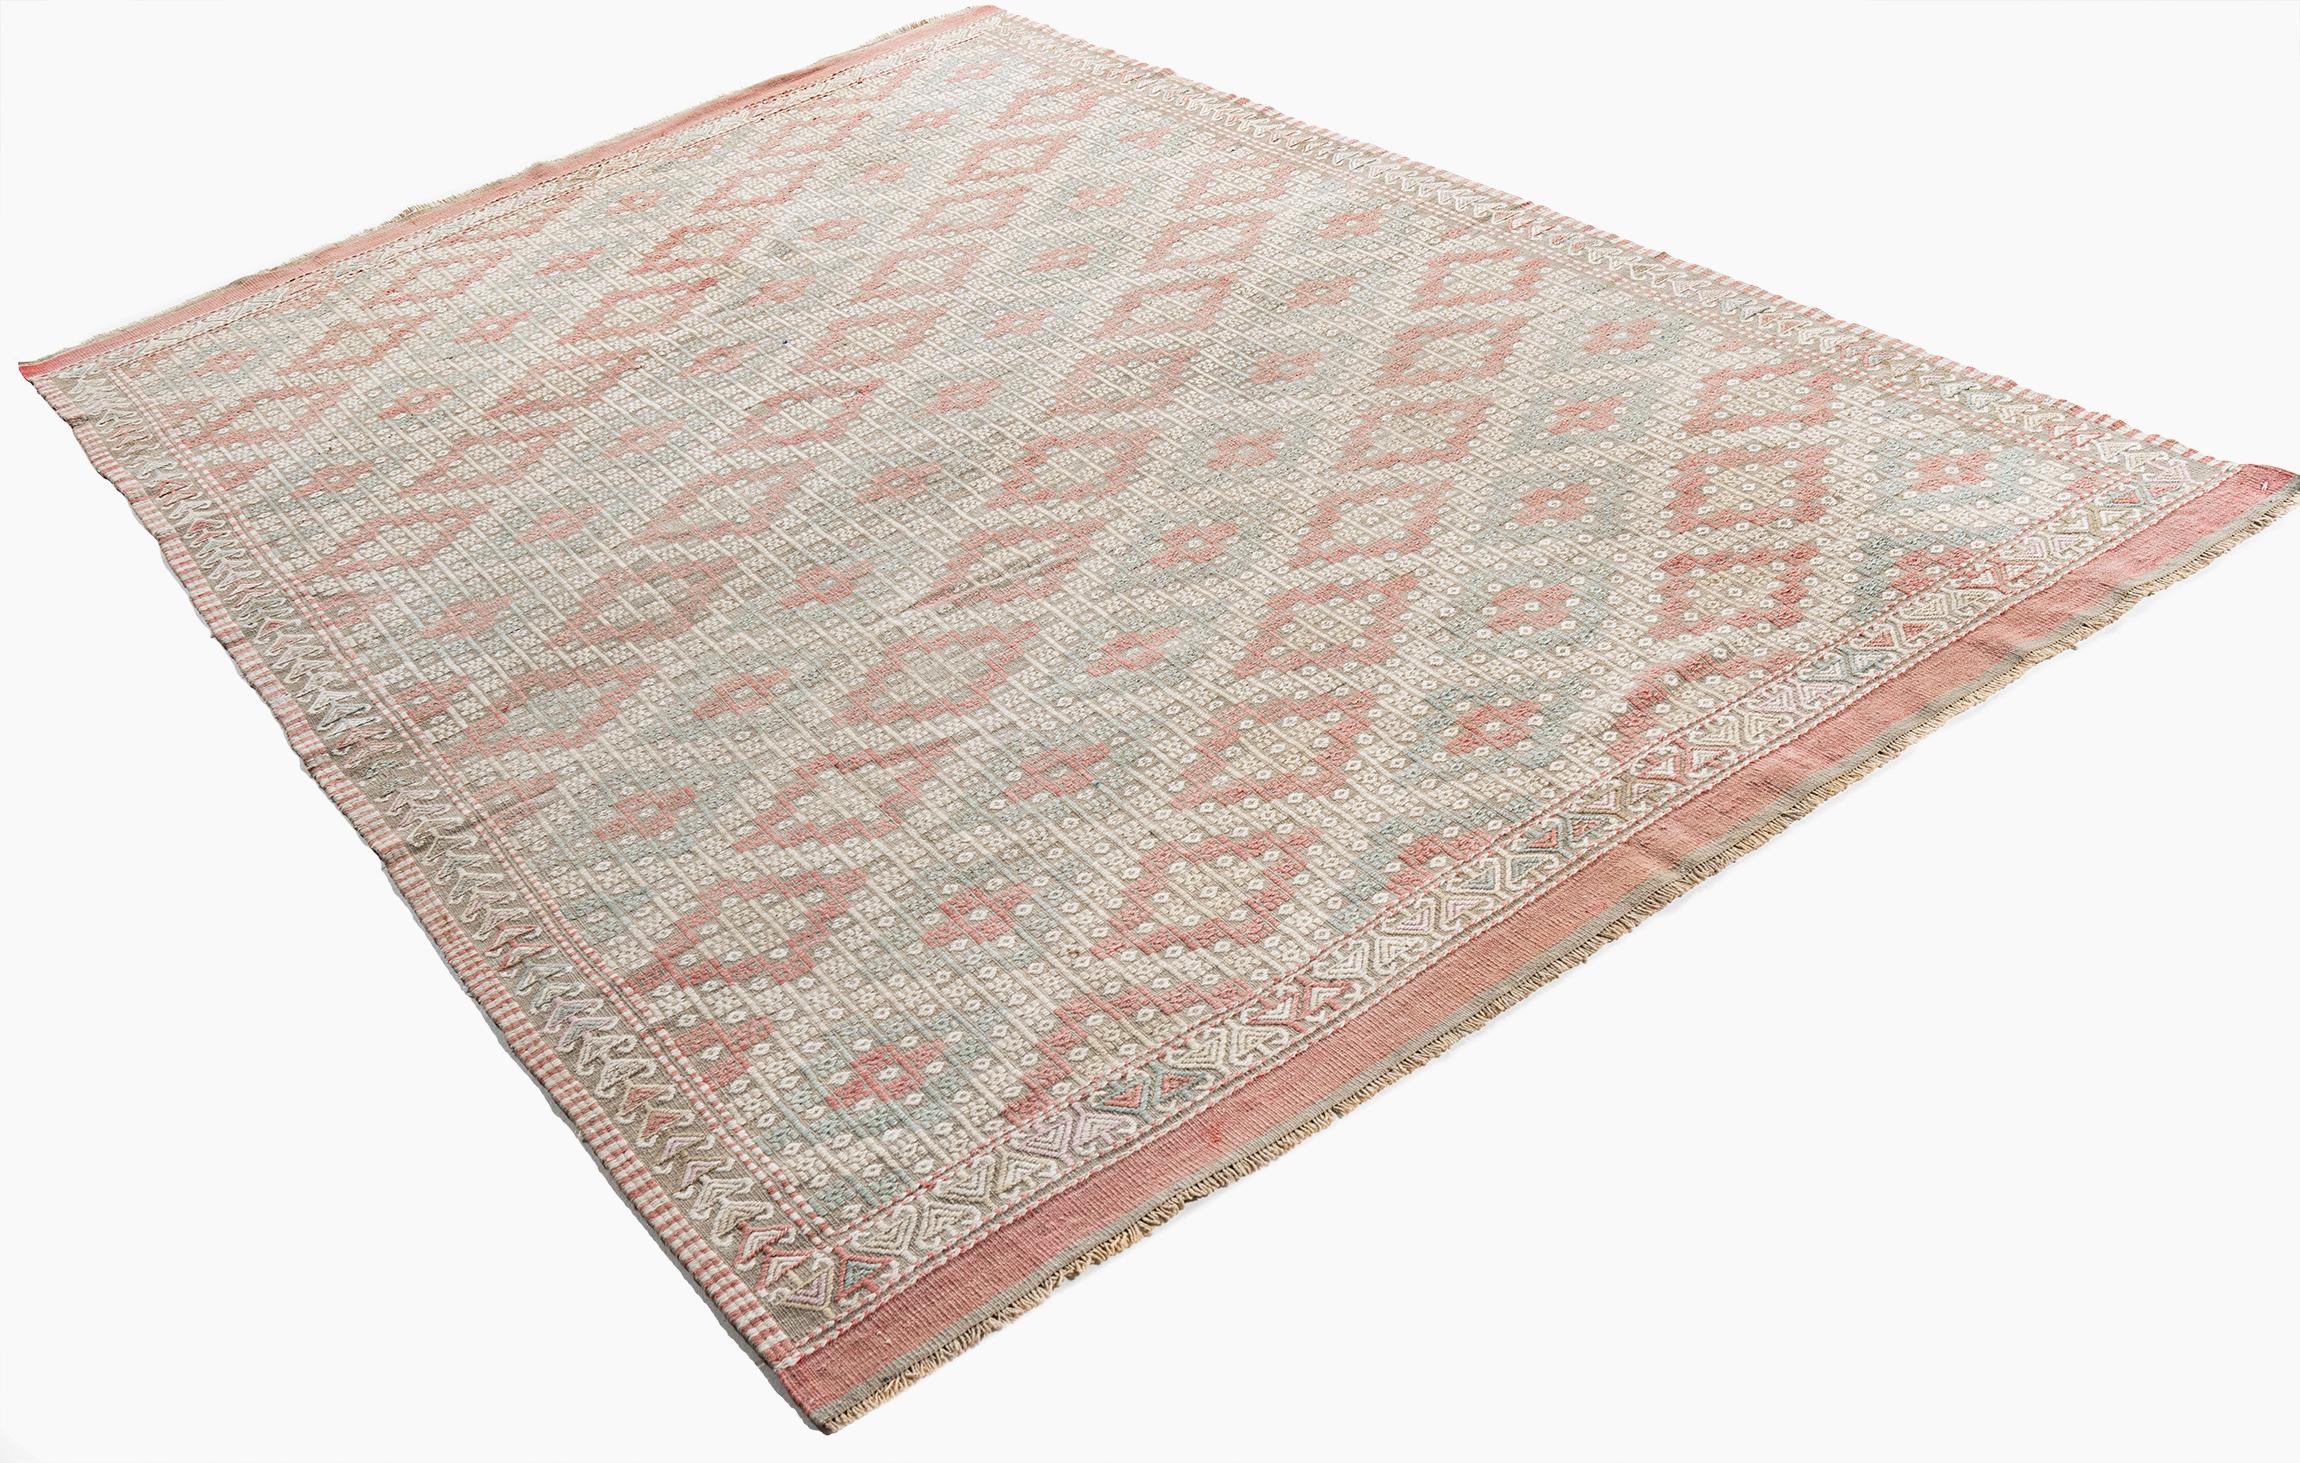 Vintage Turkish Jajim Flatweave Area Rug  5'1 x 8'11 In Good Condition For Sale In New York, NY